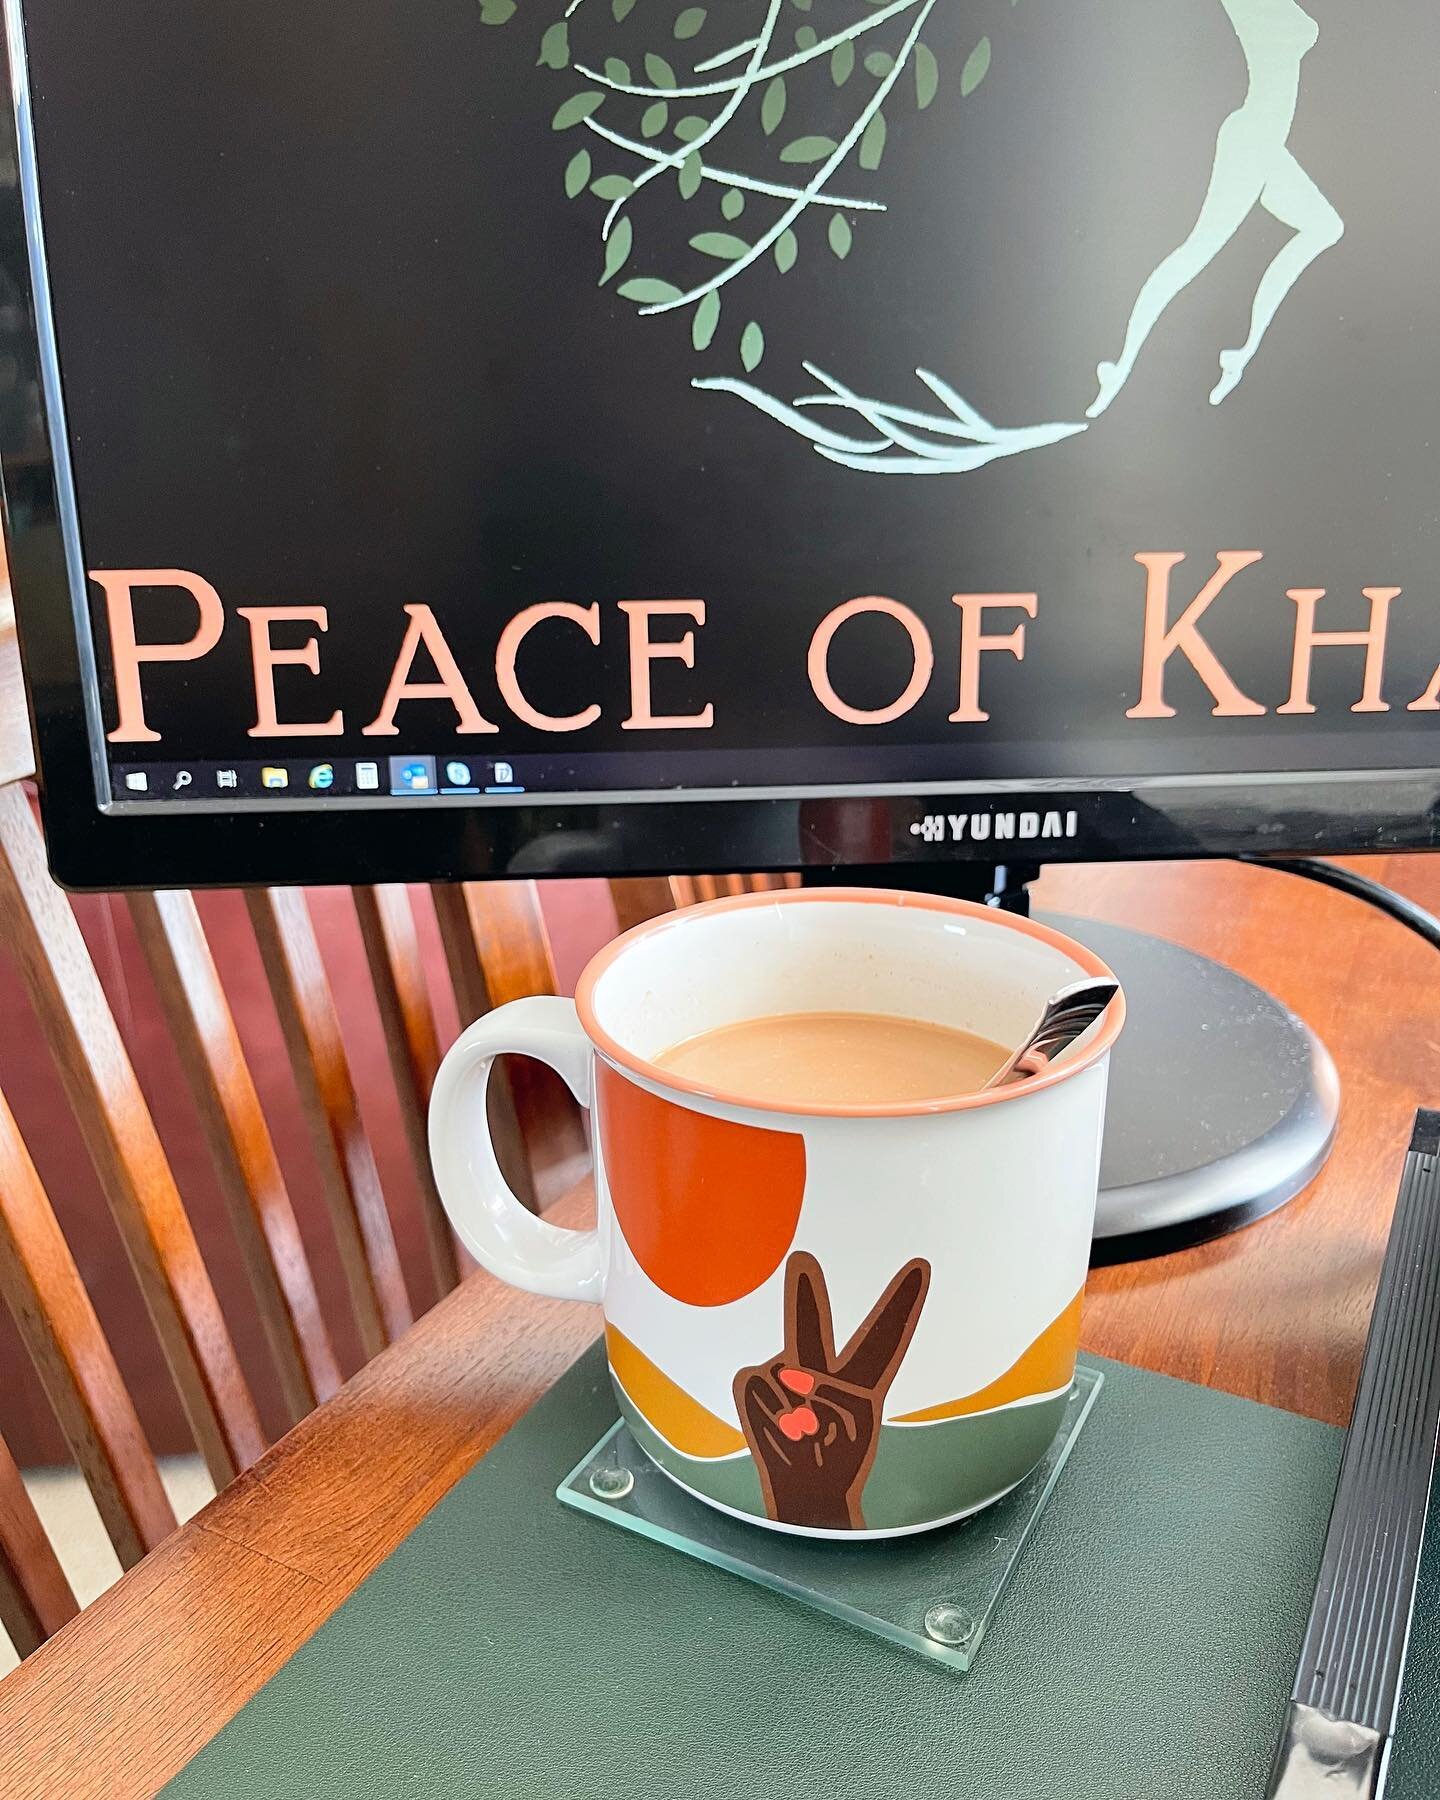 May your confidence be stronger than your coffee and your soul shine brighter than the sunrise. 

#findyourpeace #bestrong #beconfident #shinebright #peaceofkhandi